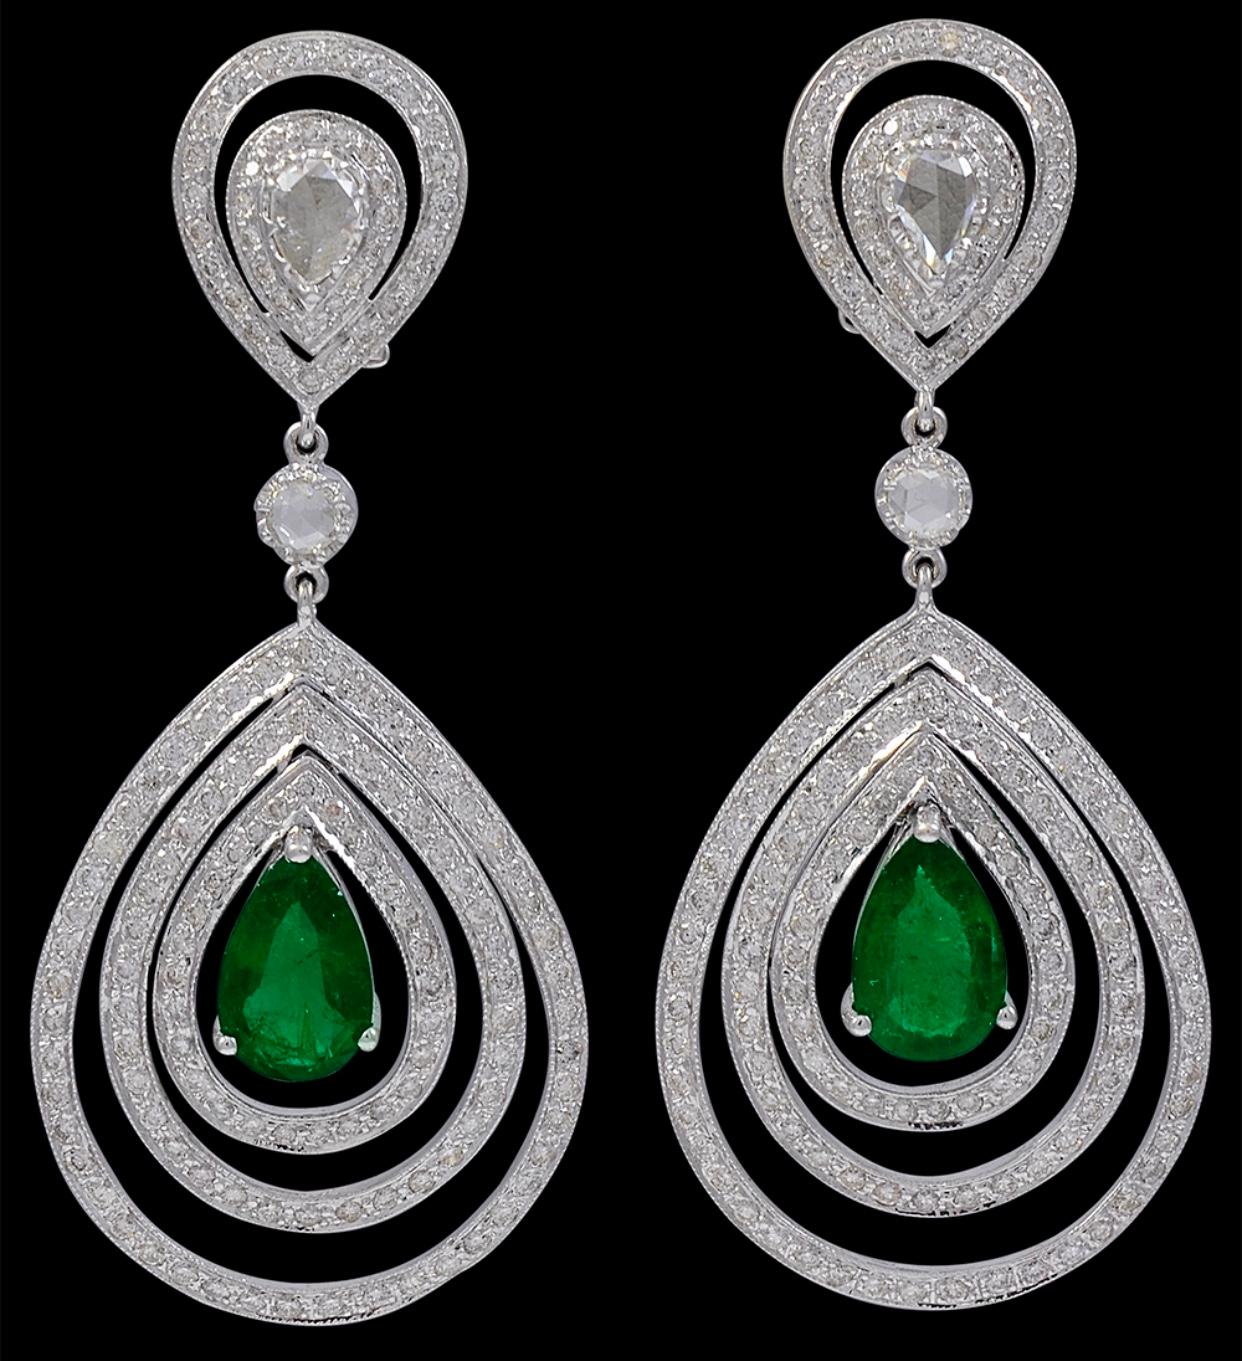 GIA Certified 4.2Ct Zambian Pear Emerald Diamond Hanging/ Drop Earrings 18K Gold
Approximately 4.2 Carat Zambian Pear Shape Emerald Diamond  Hanging Earrings 18 Karat  White Gold
This exquisite pair of earrings are beautifully crafted with 18 karat